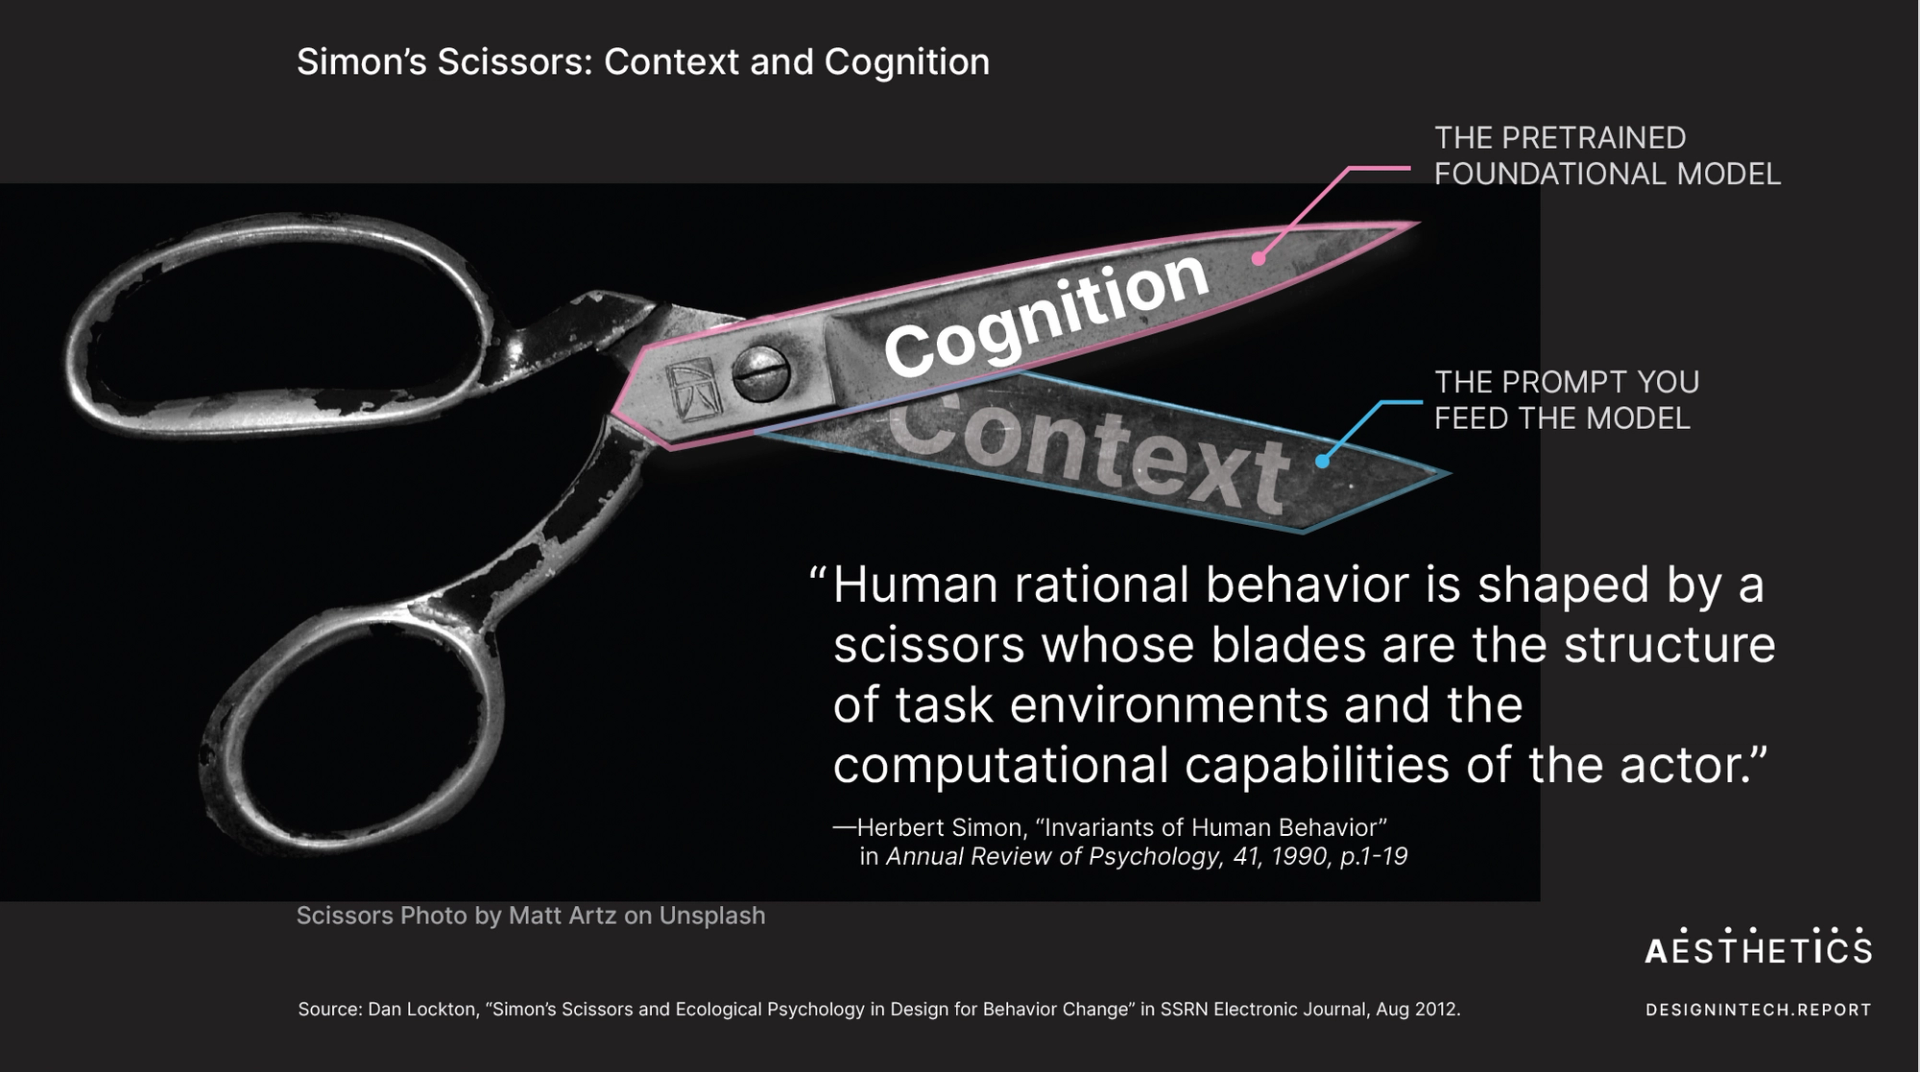 A presentation slide with a pair of scissors depecting Herbert Simon's prophecy, who described intelligence as two blades of scissors: cognition and context memory.